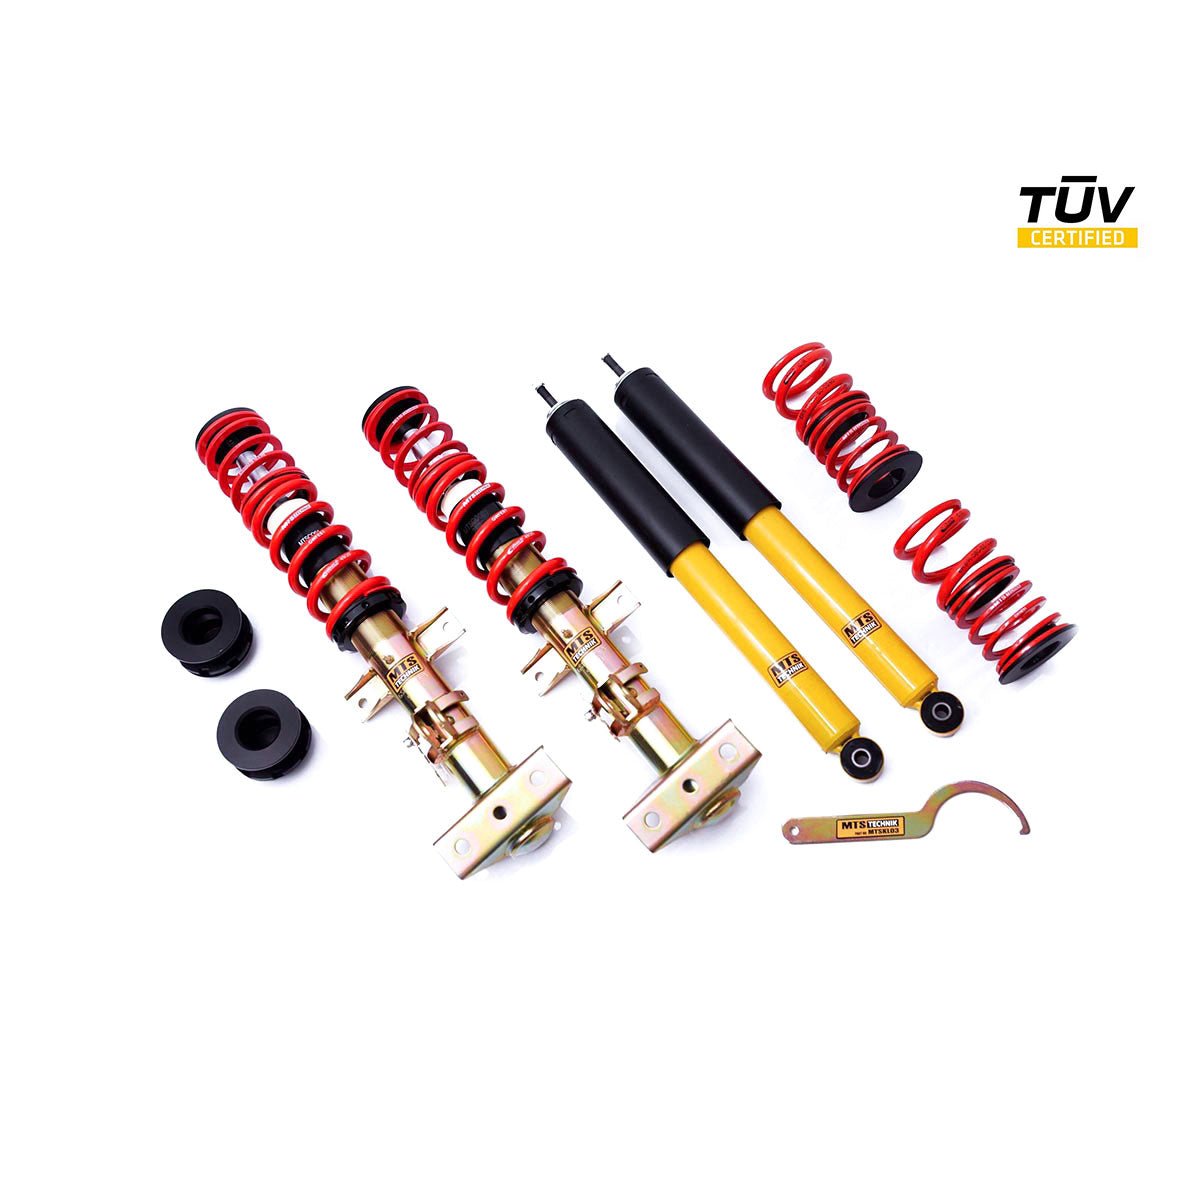 MTS TECHNIK coilover kit SPORT BMW Z3 Roadster (with TÜV) - PARTS33 GmbH